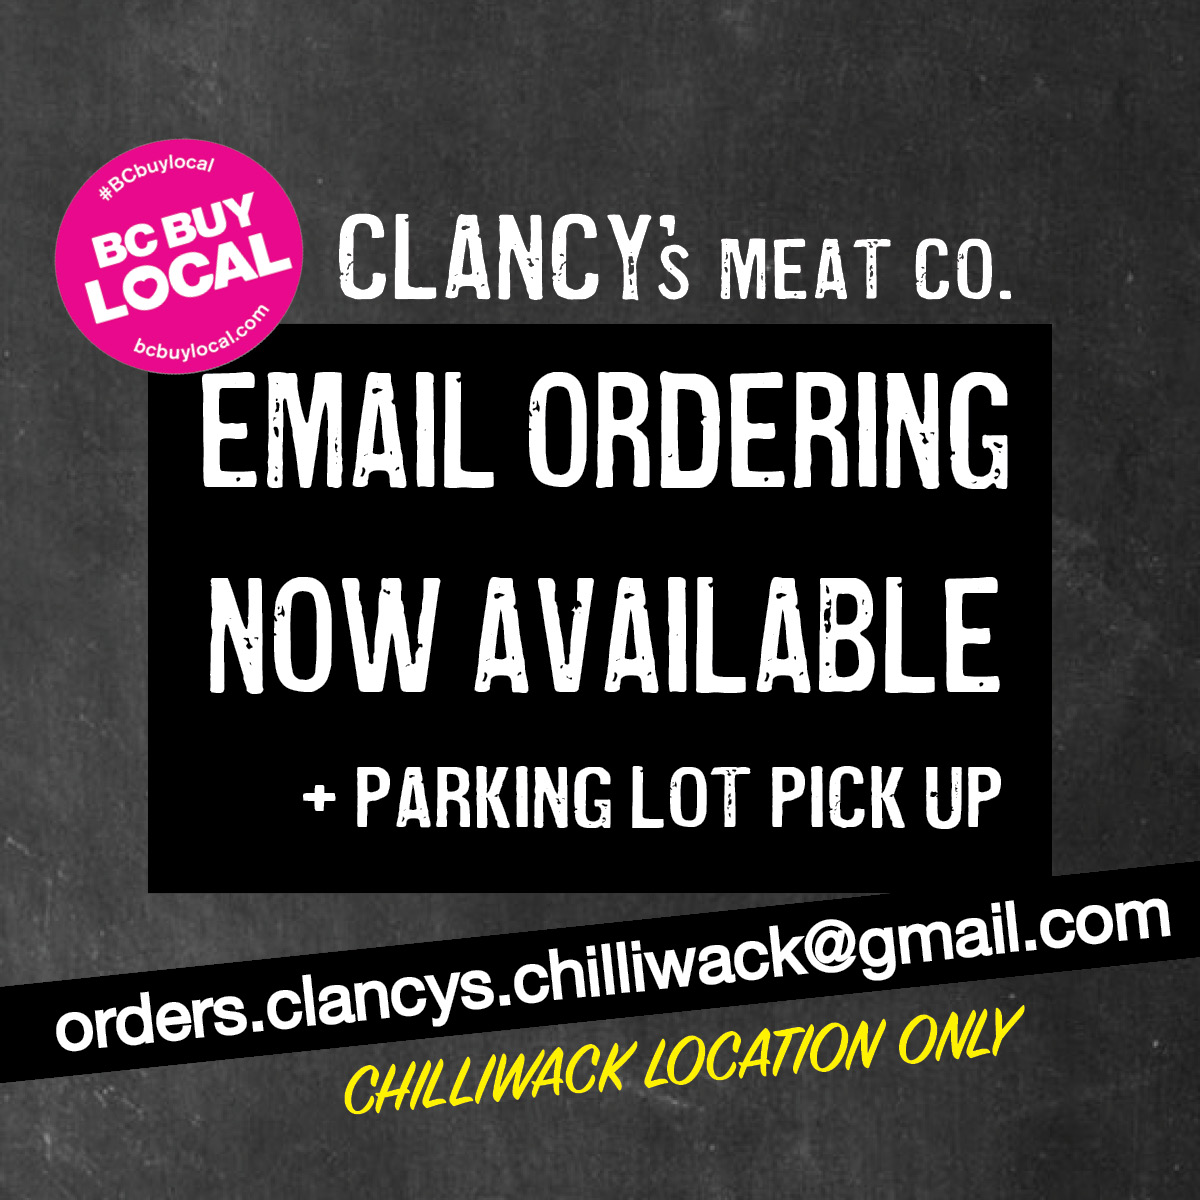 Chilliwack Clancys Email Ordering.jpg